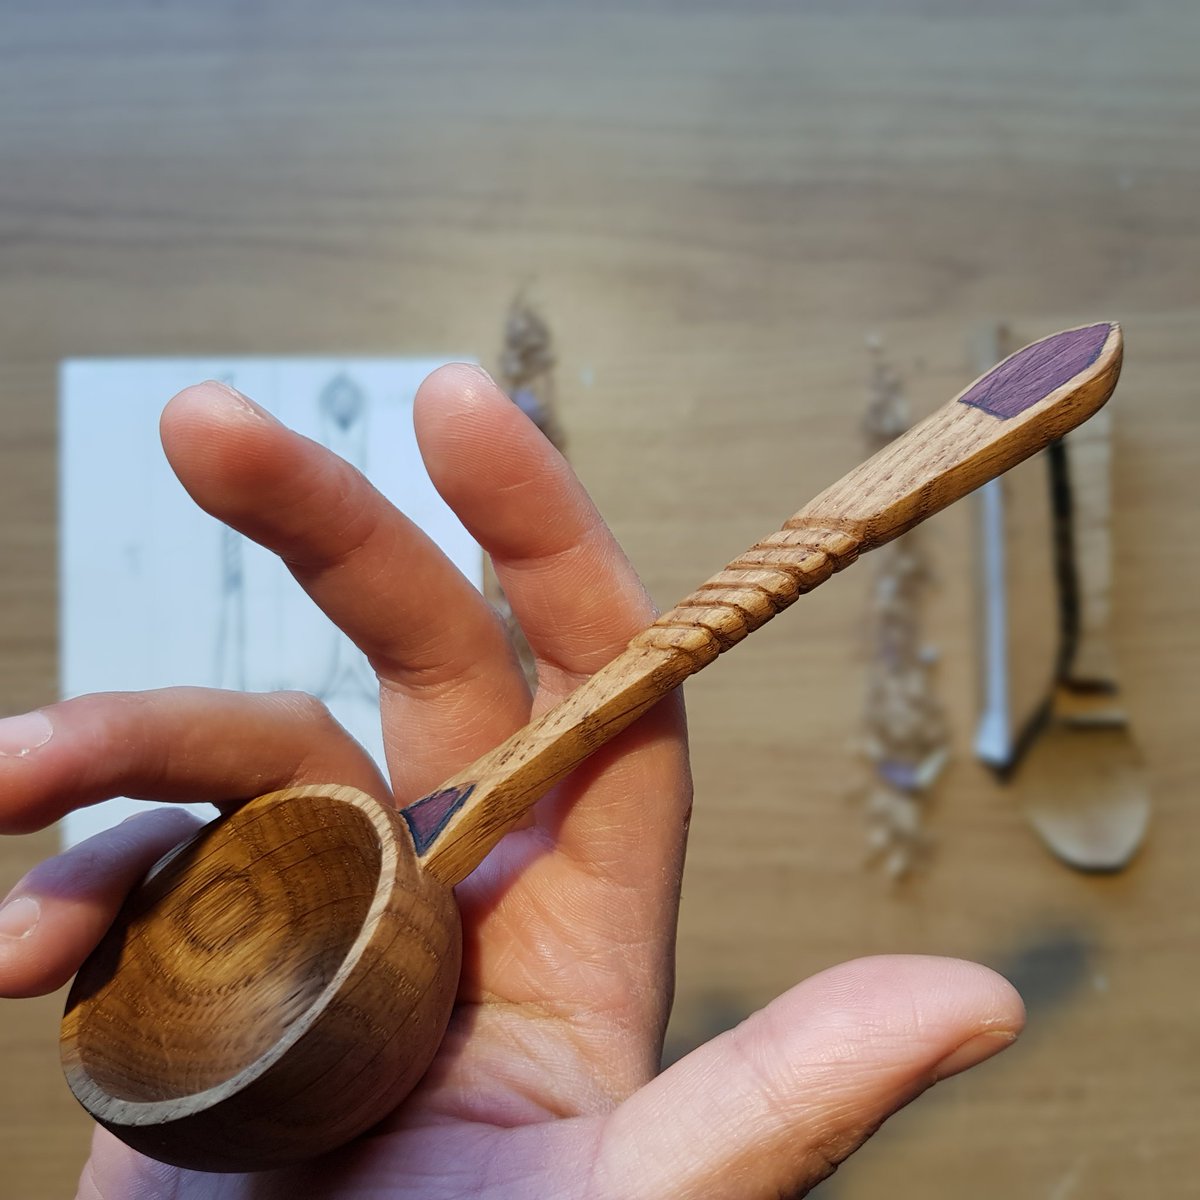 A lovely spoon I carved! If you want to see more details be sure to check out my ig page🤠 #spoon #carving #handmade #spooncarving